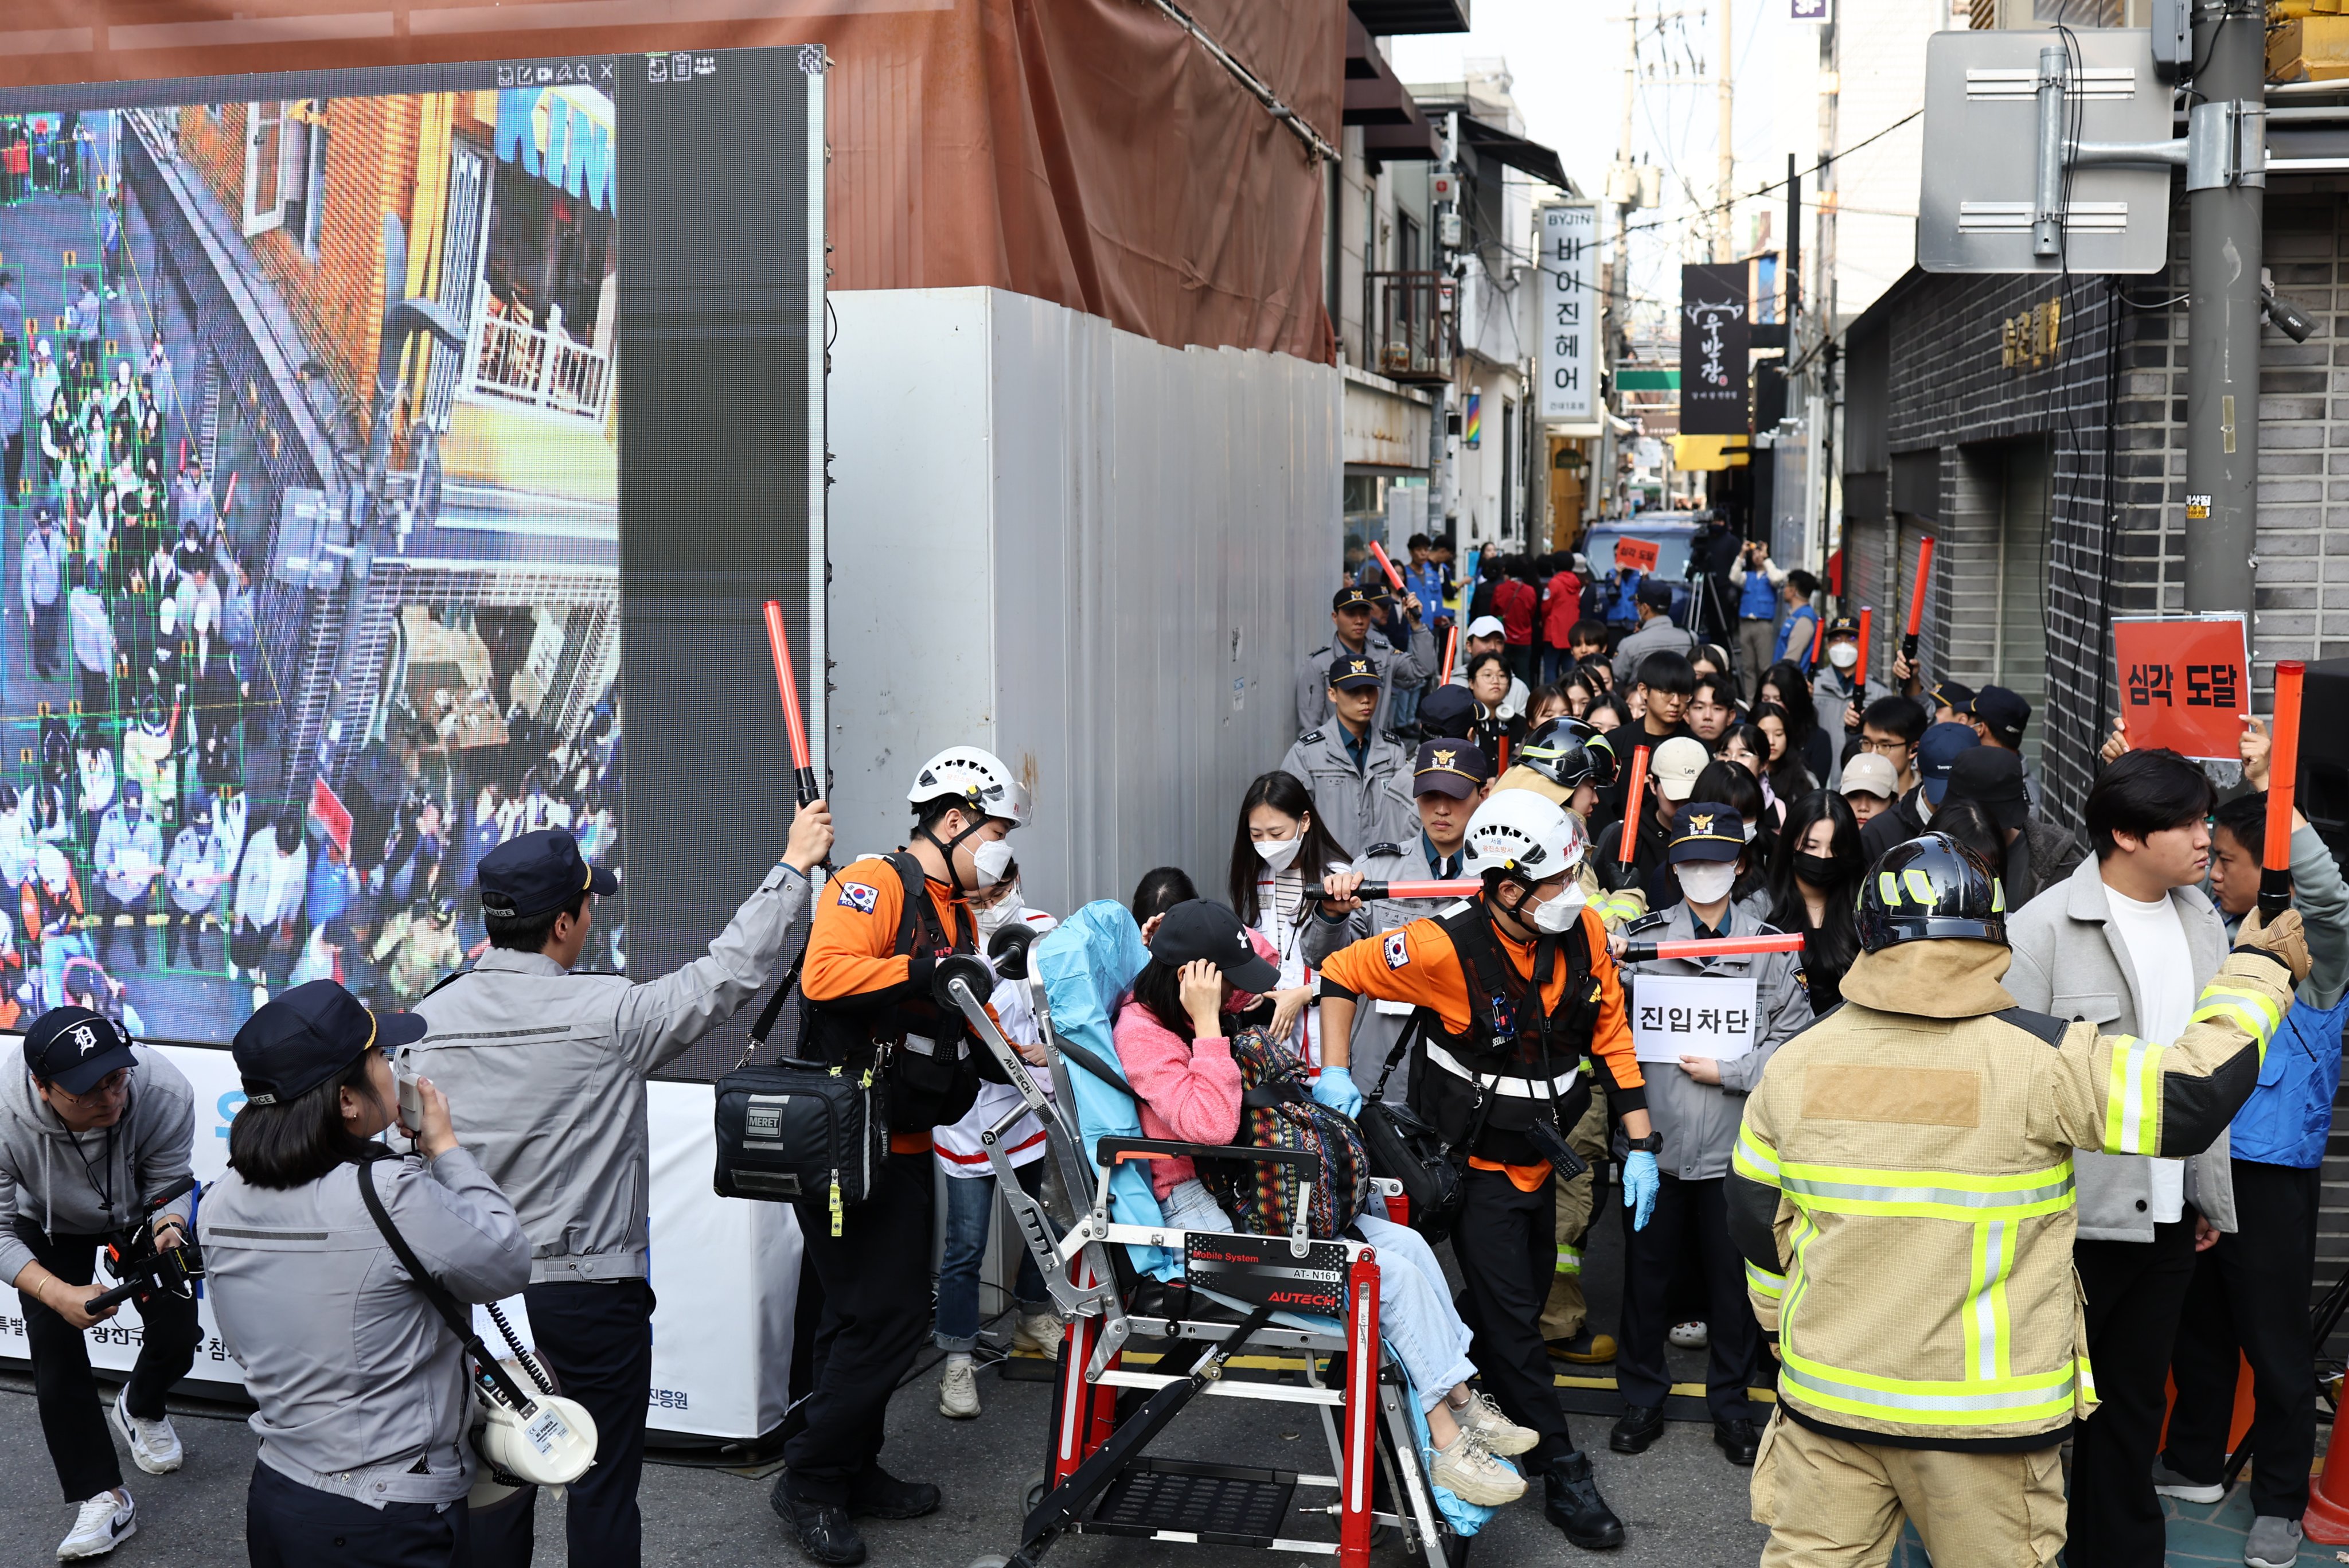 People take part in a drill, conducted by the police to demonstrate how to operate a crowd alert sensor system to control and reduce crowd surges. Photo: EPA-EFE